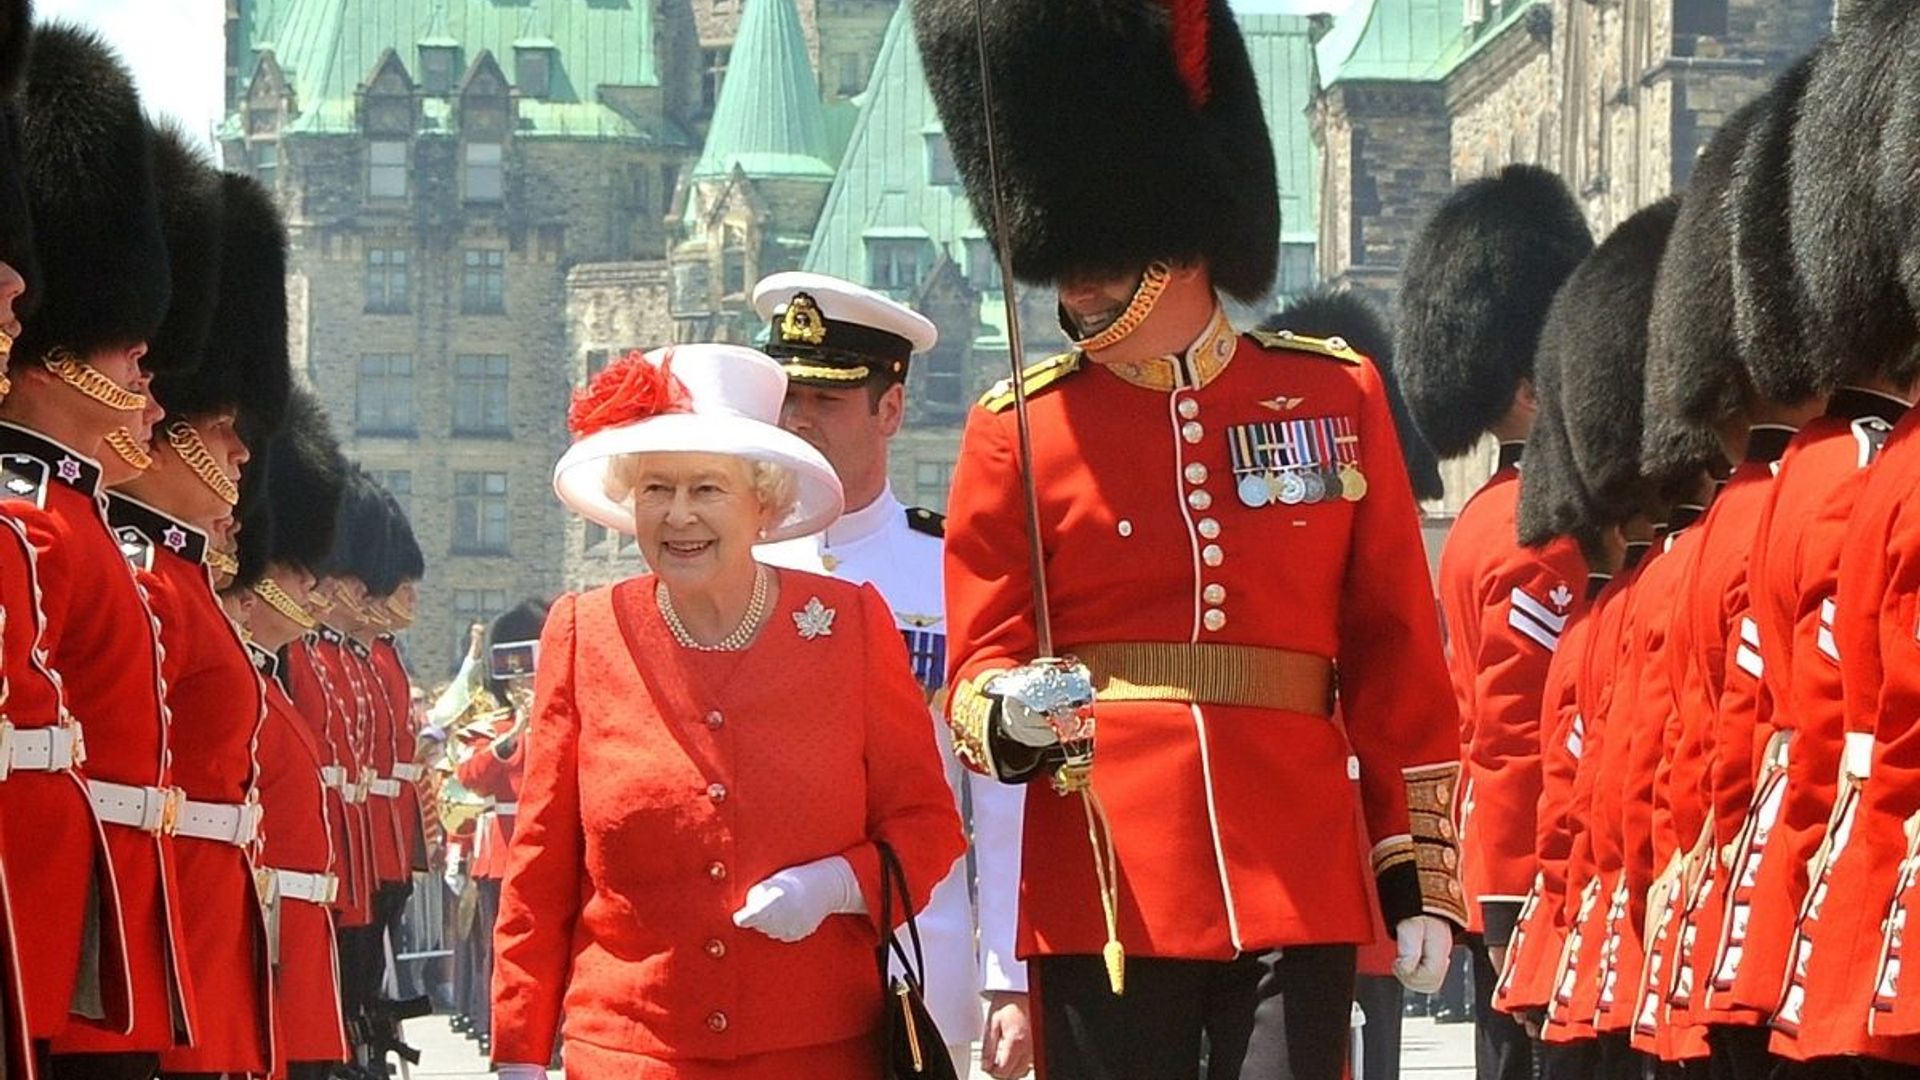 The Queen and Canada A love story that's still going strong after all